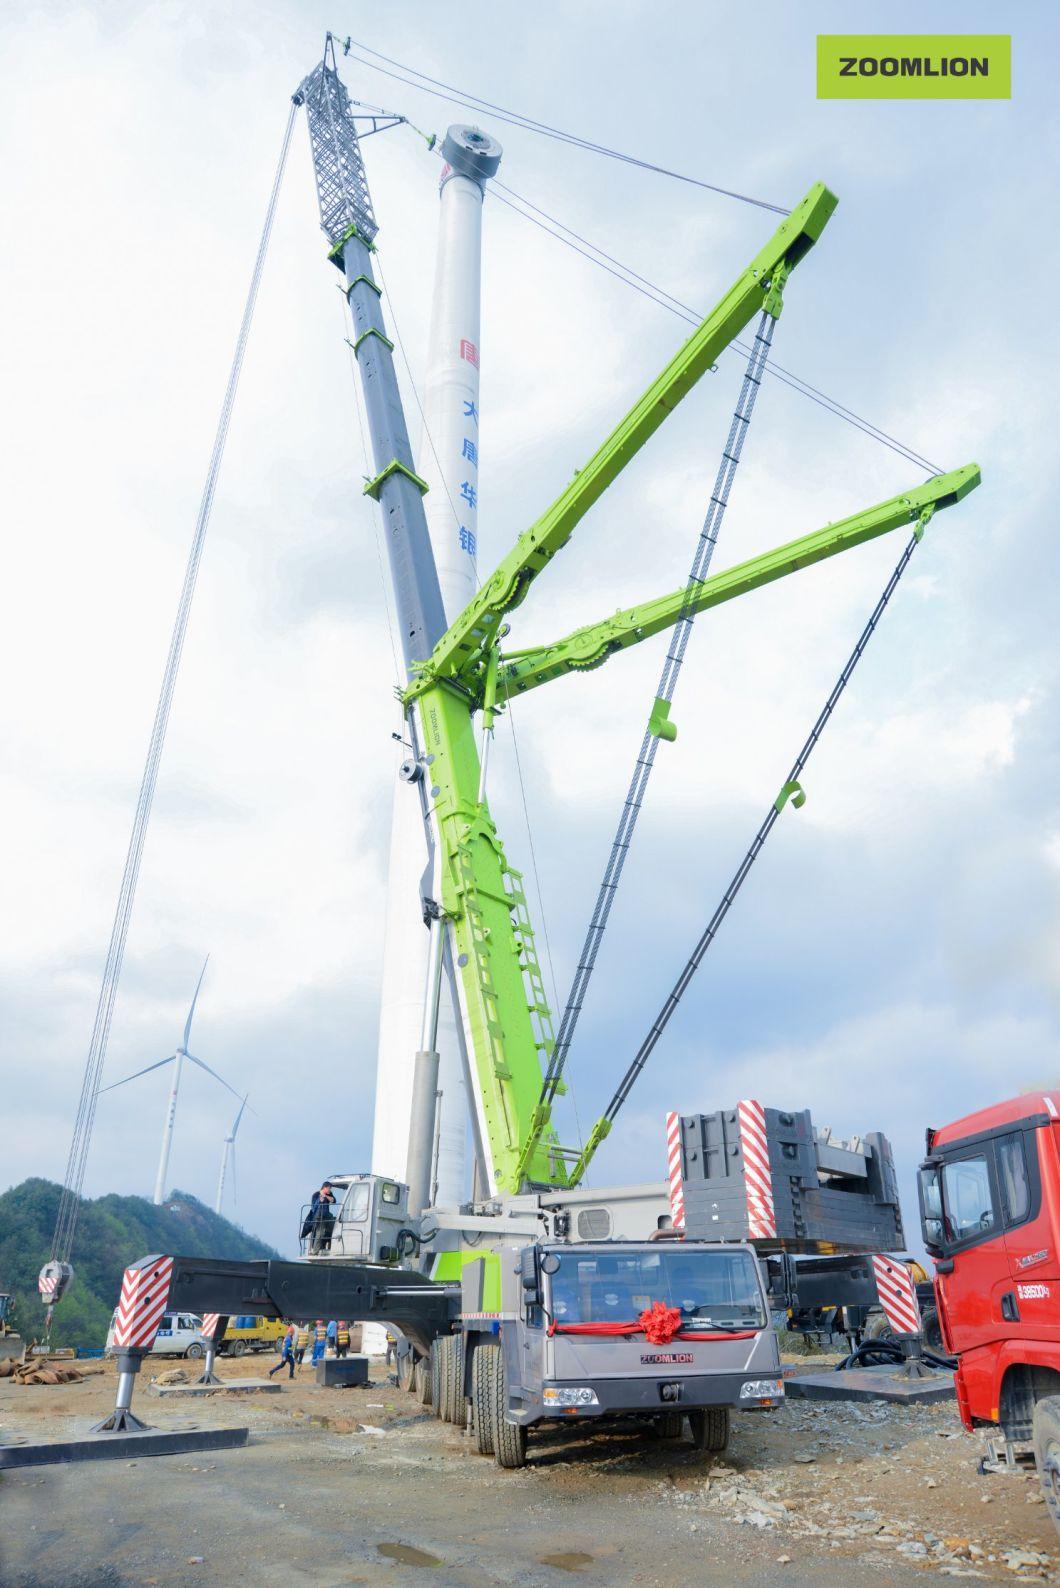 Mobile Truck Mounted Crane with 5-Section U-Shaped 40m Long Main Boom